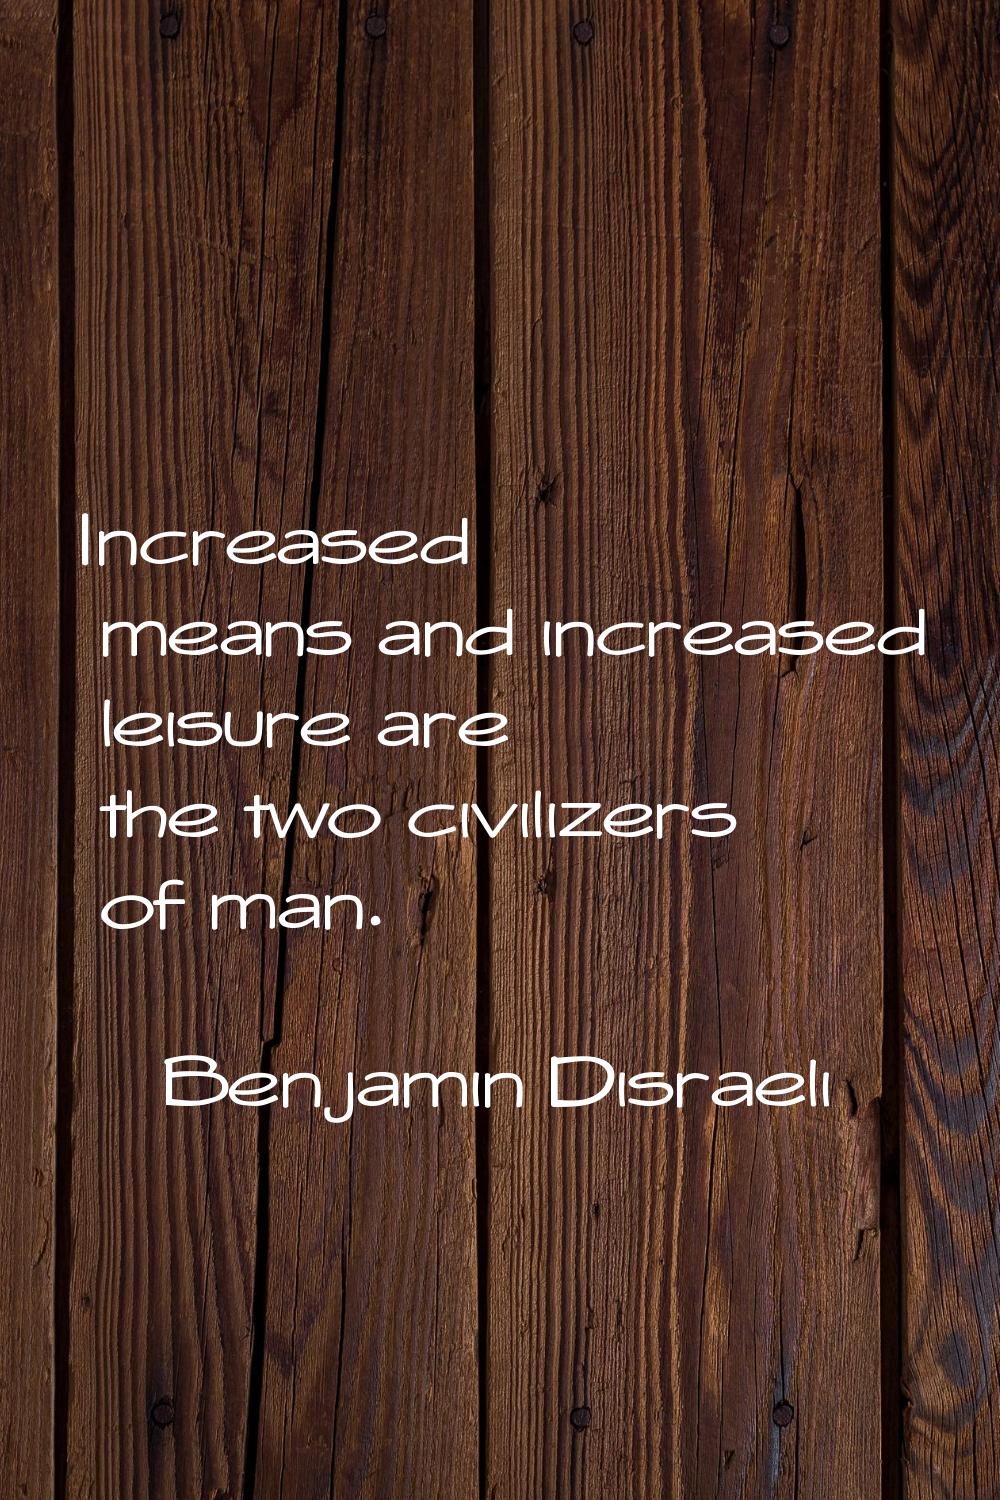 Increased means and increased leisure are the two civilizers of man.